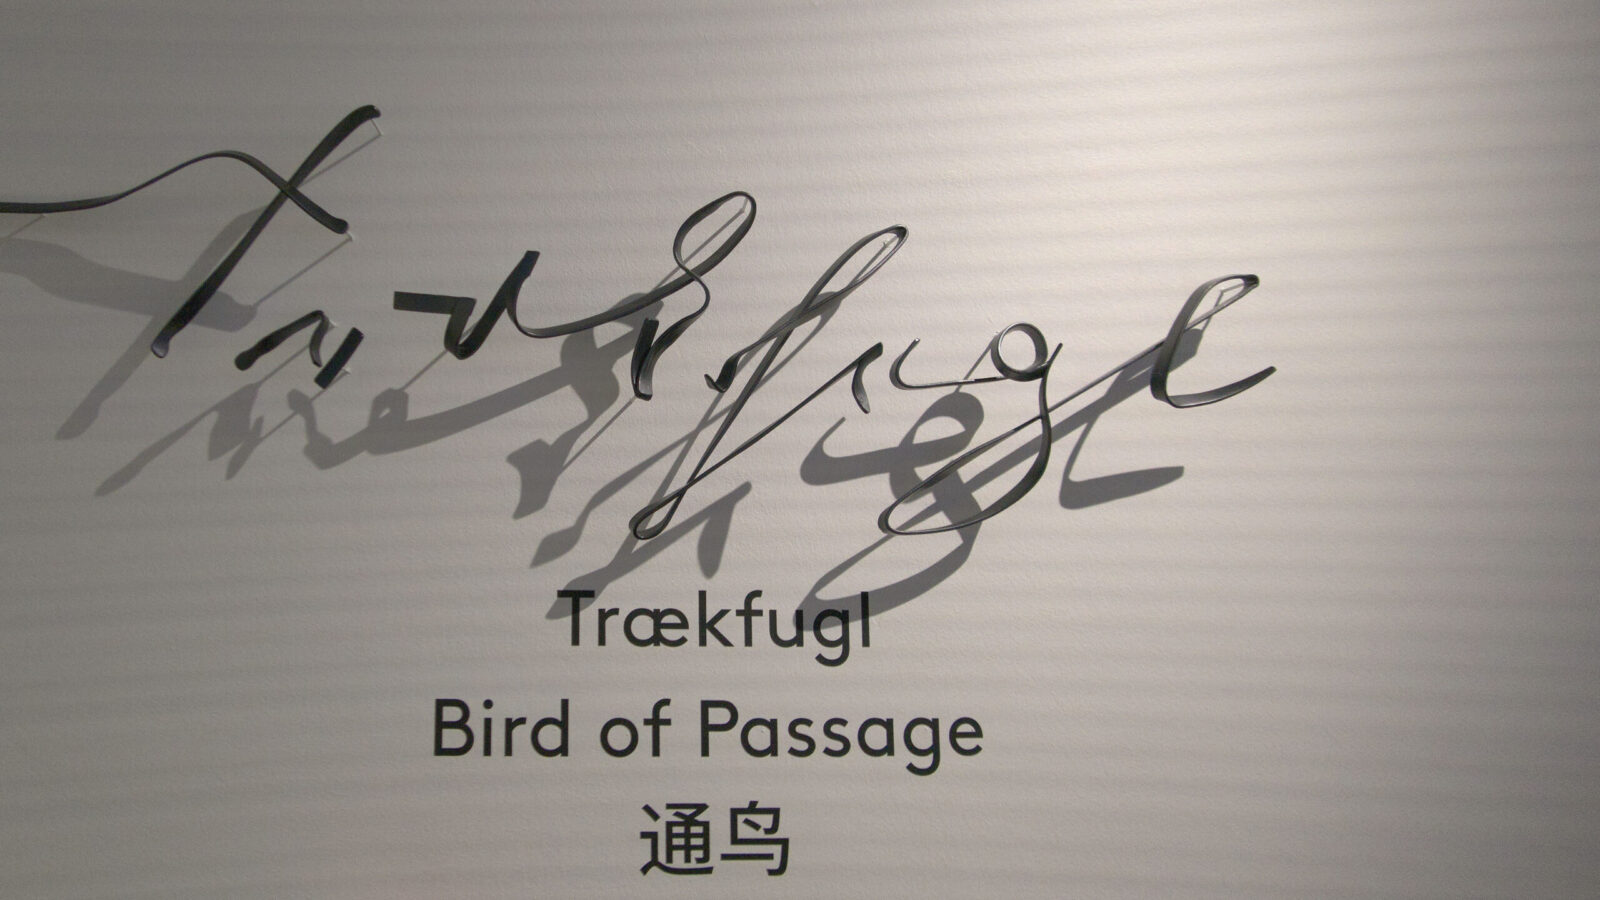 Beautifully crafted medal sculpture spelling out Traekfugl. This word and Bird of Passage and a chinese sign is shown below it